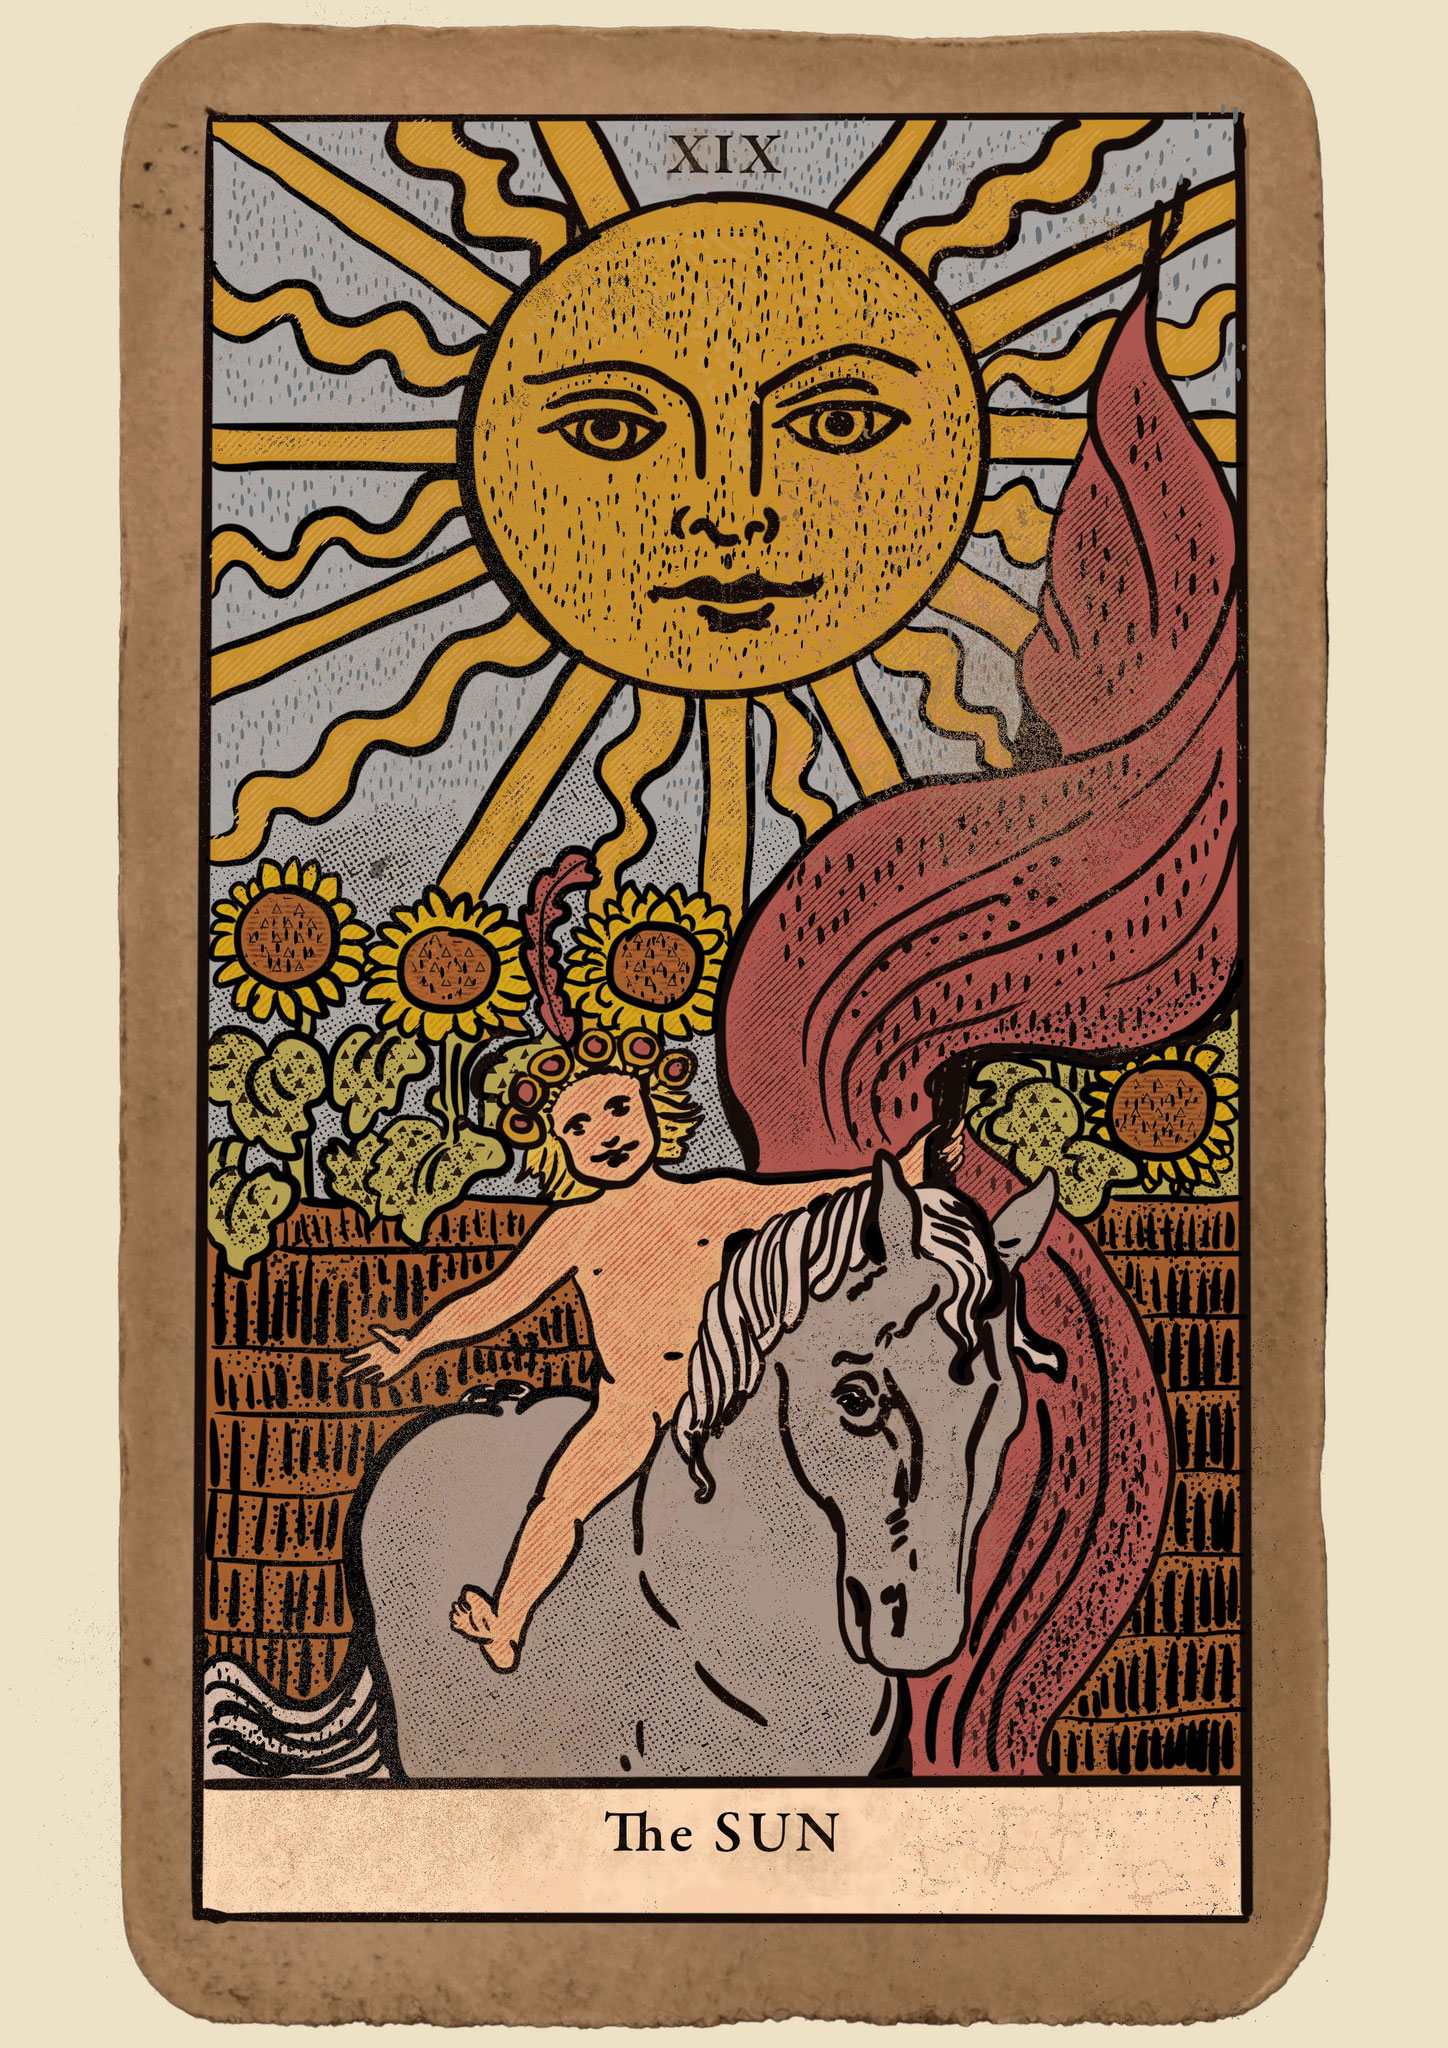 Recreation of a Tarot card after a painting by Pamela Colman Smith (public domain) / illustration and editing / ageing